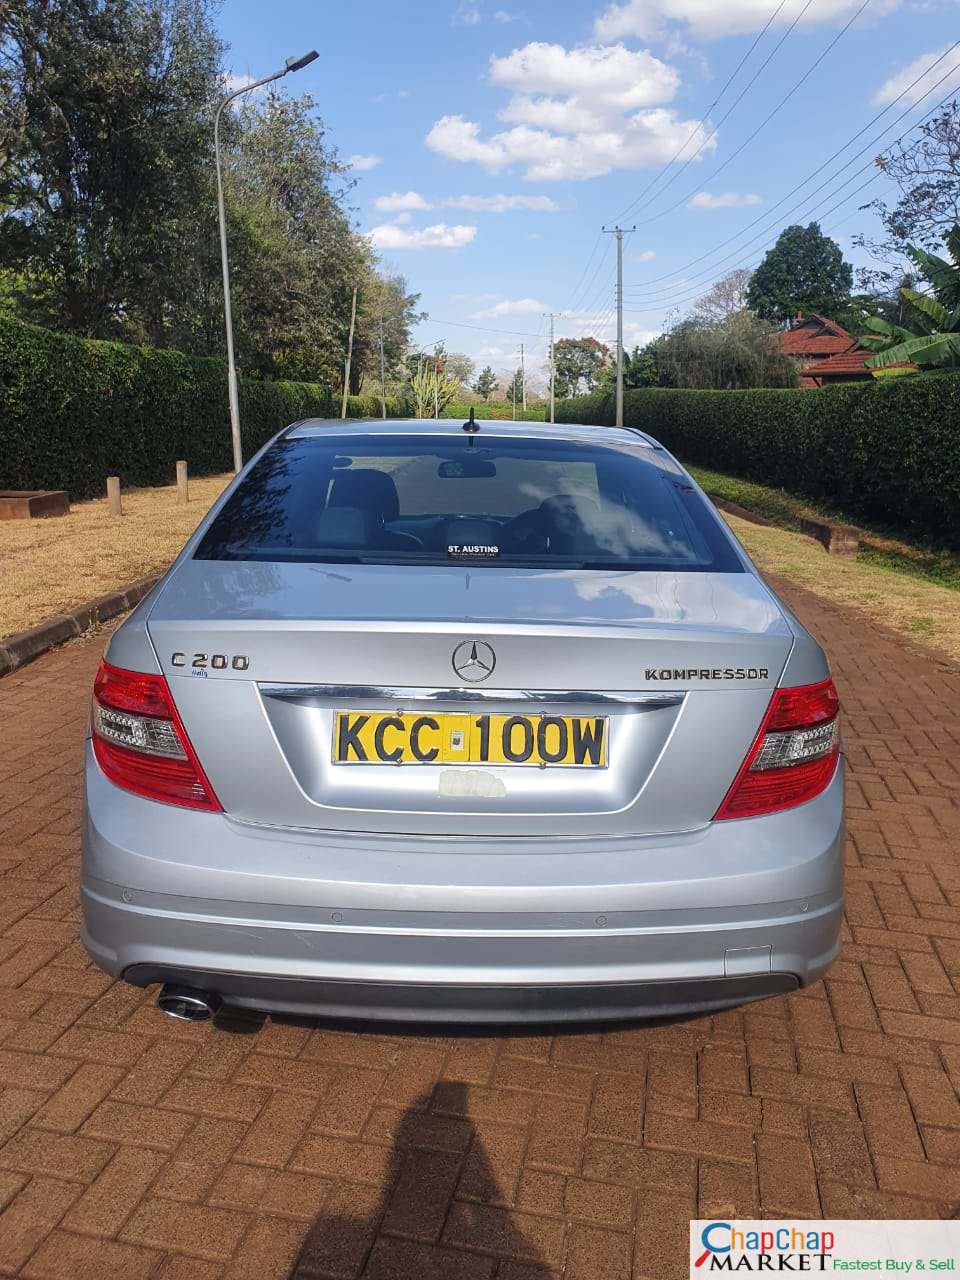 Mercedes Benz C200 🔥 You Pay 30% DEPOSIT 70% installments Trade in OK